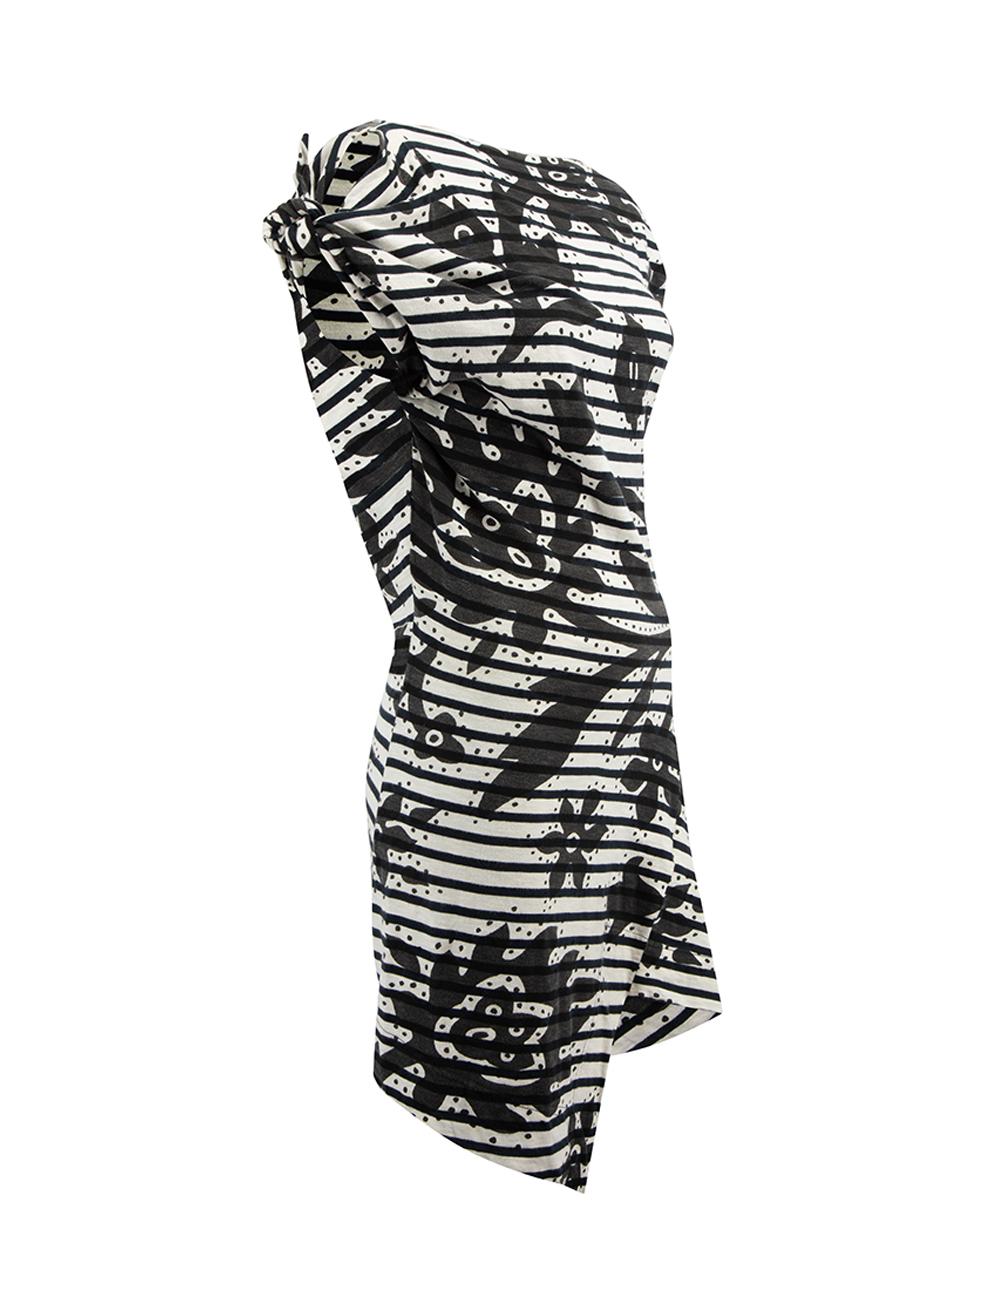 CONDITION is Very good. Minimal wear to dress is evident. Slight discolouration to neckline is evident on this used Vivienne Westwood Anglomania designer resale item.



Details


Navy and white striped

Cotton

Knee length dress

Asymmetrical